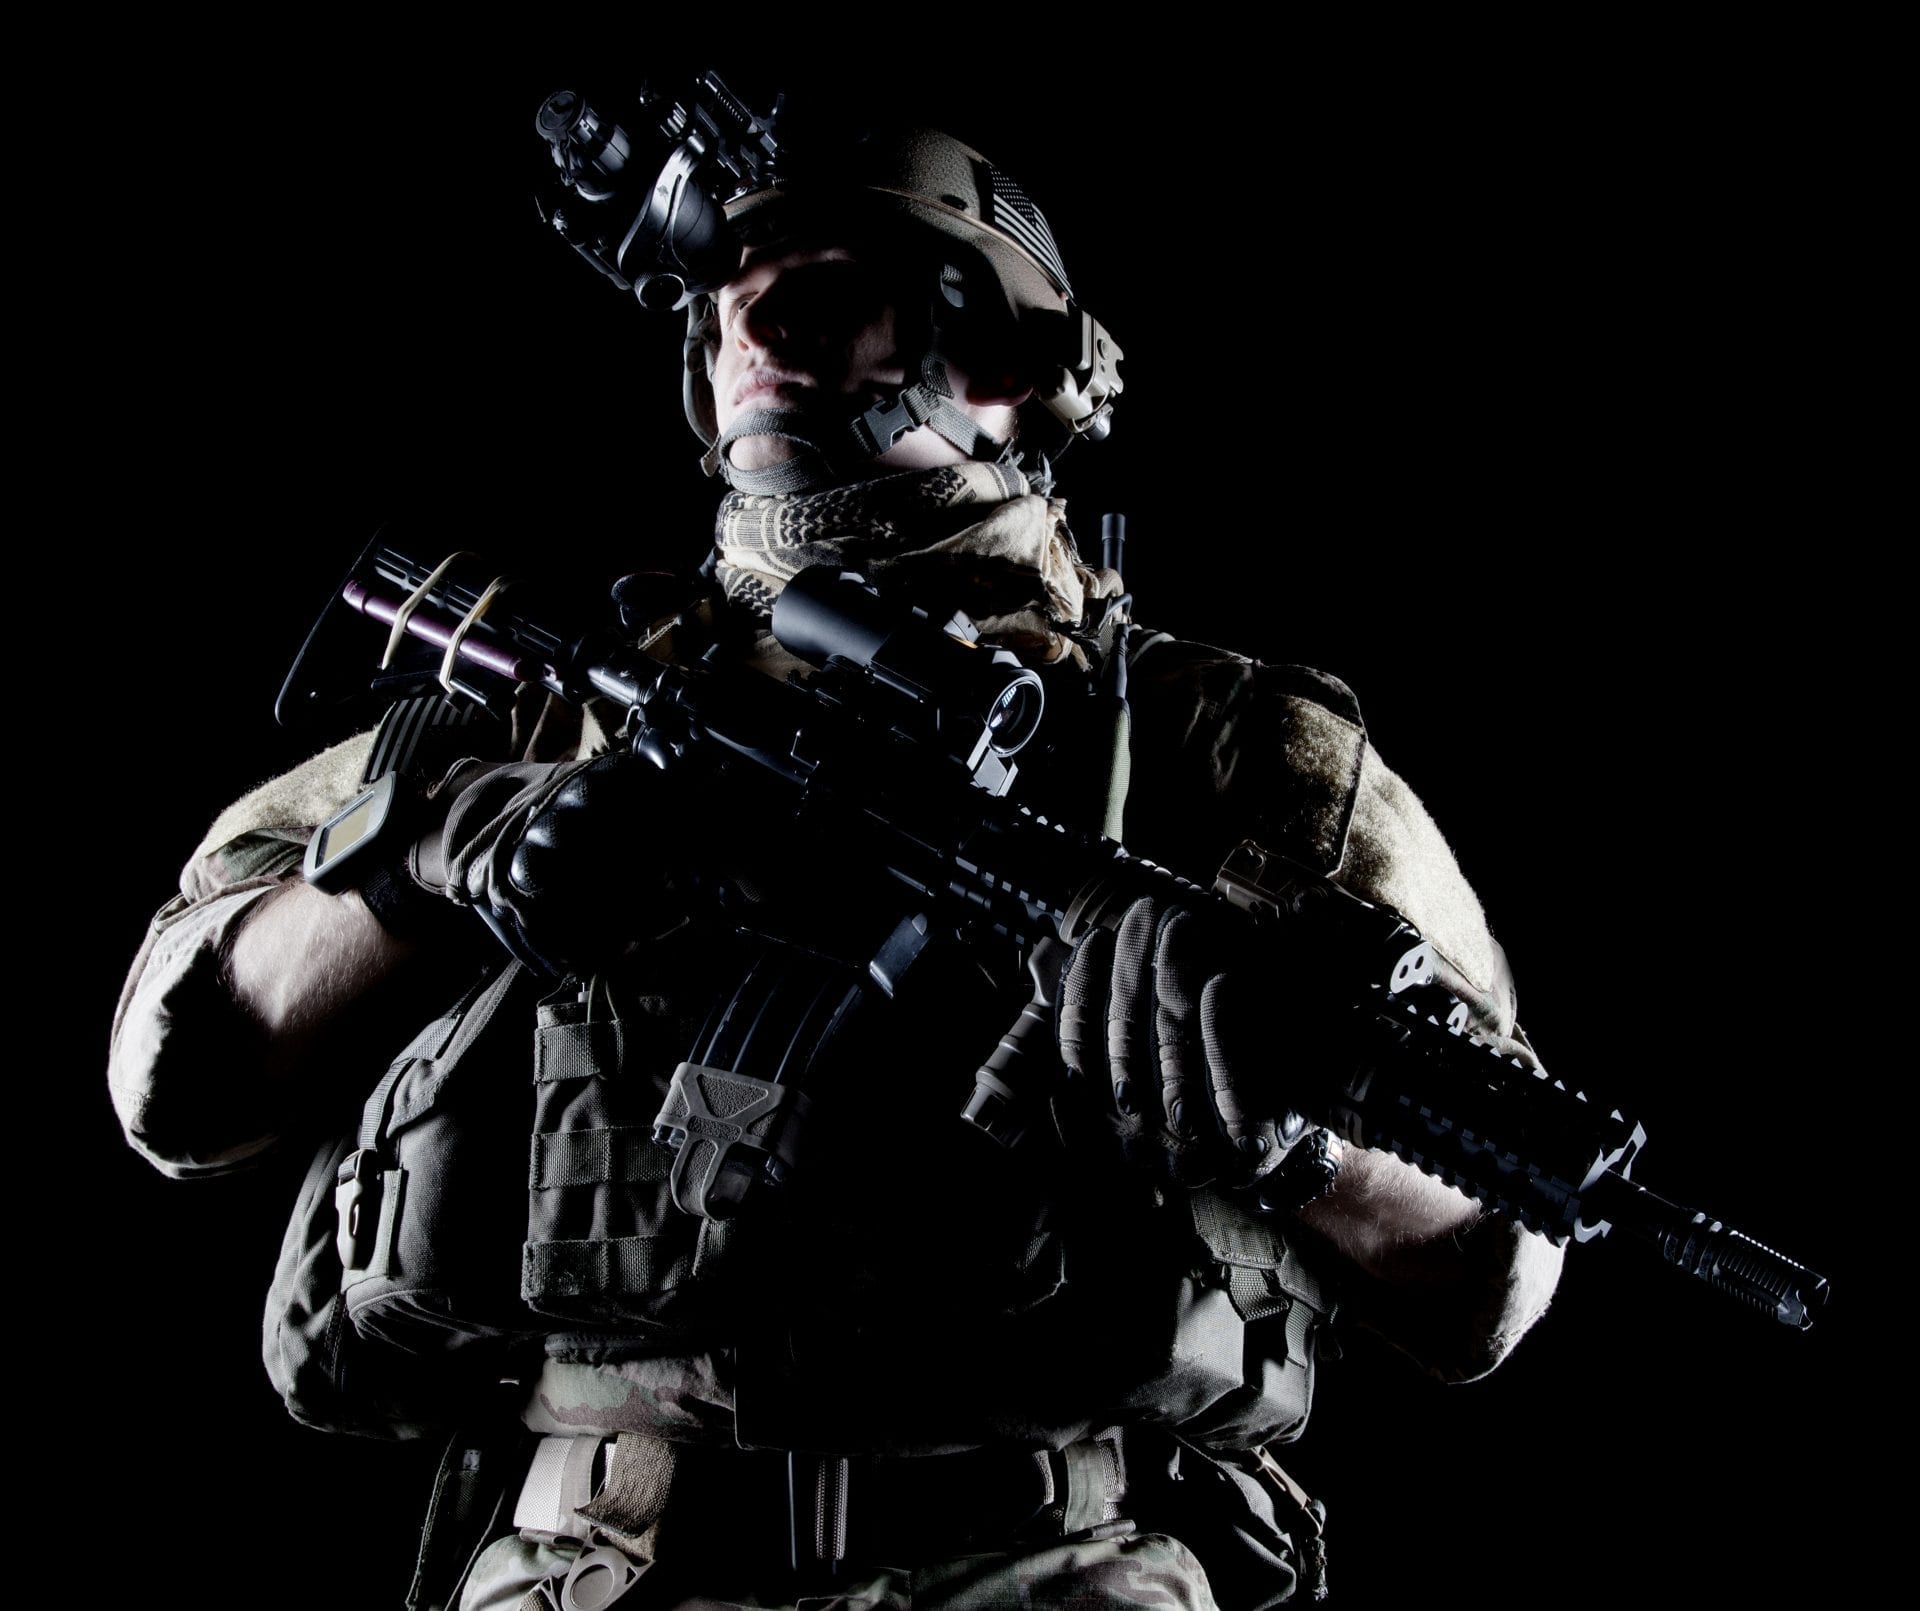 Soldier with night vision